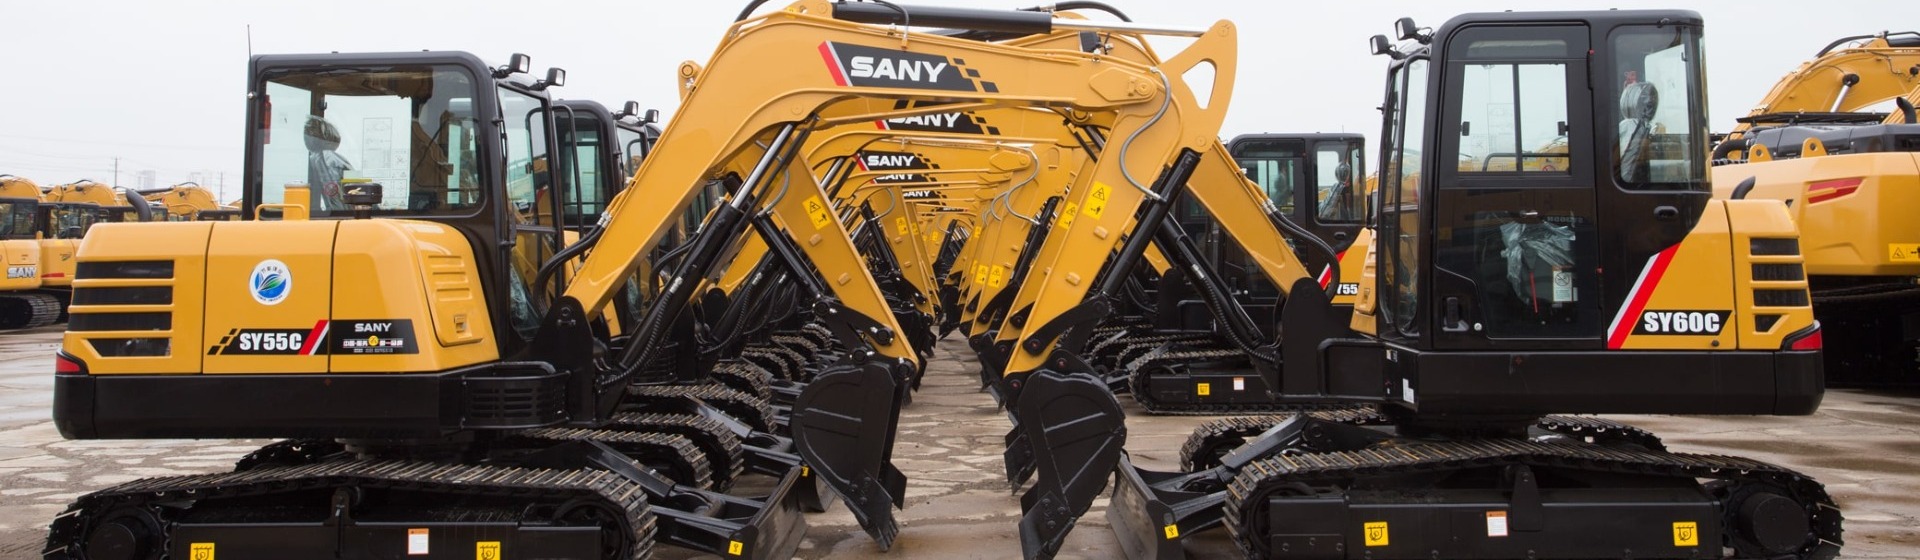 The Must-Have Attachments for Your Next SANY Excavator 